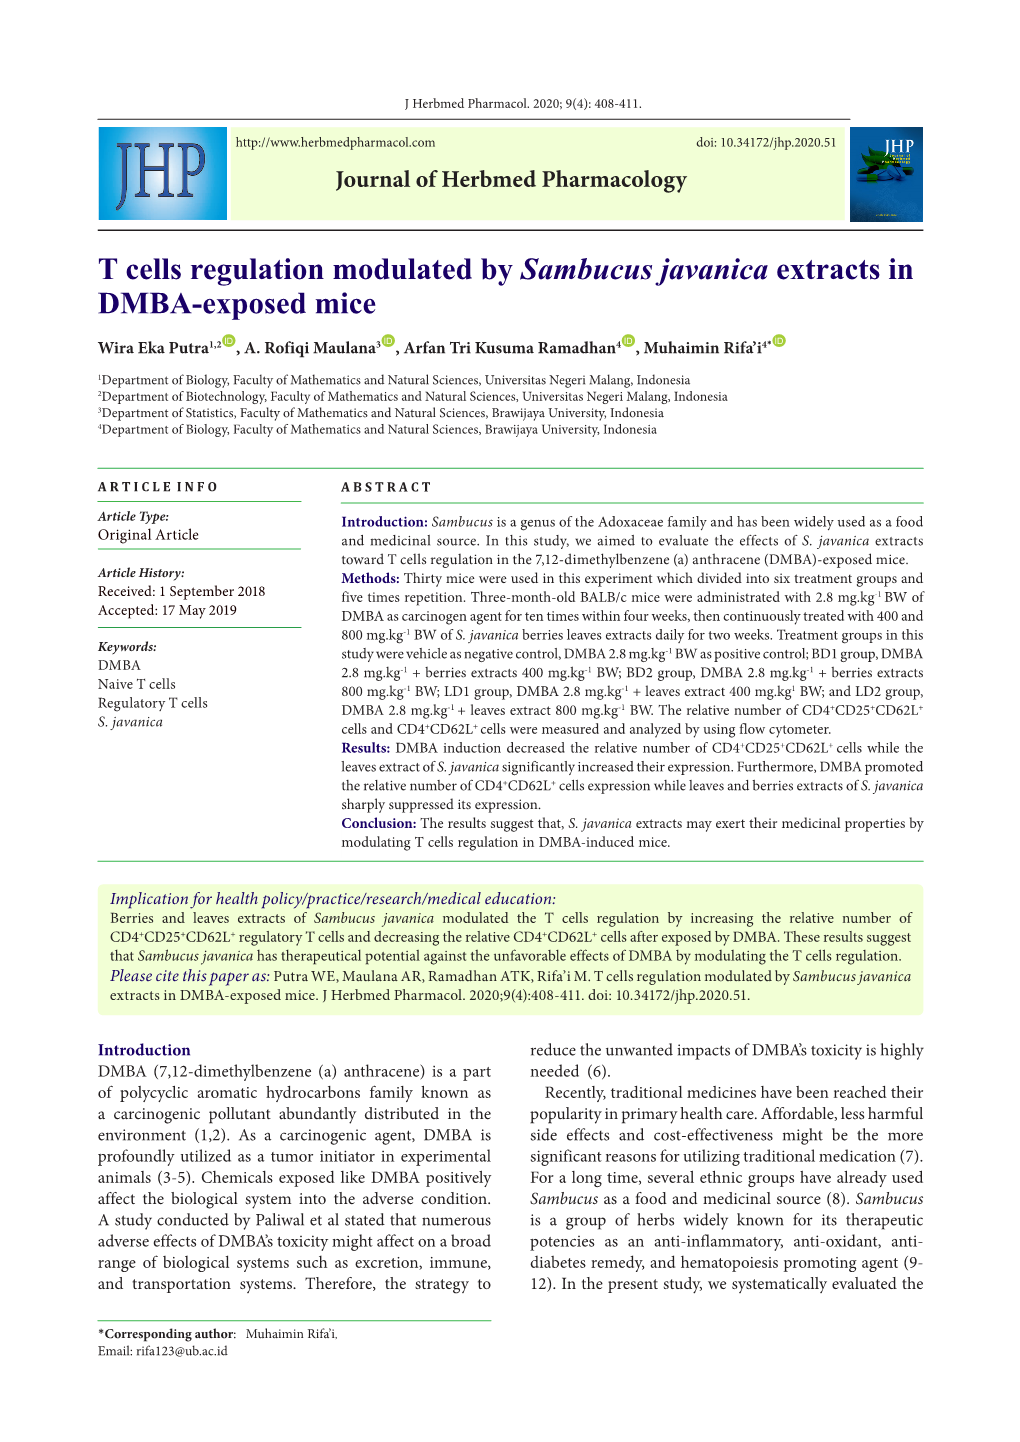 T Cells Regulation Modulated by Sambucus Javanica Extracts in DMBA-Exposed Mice